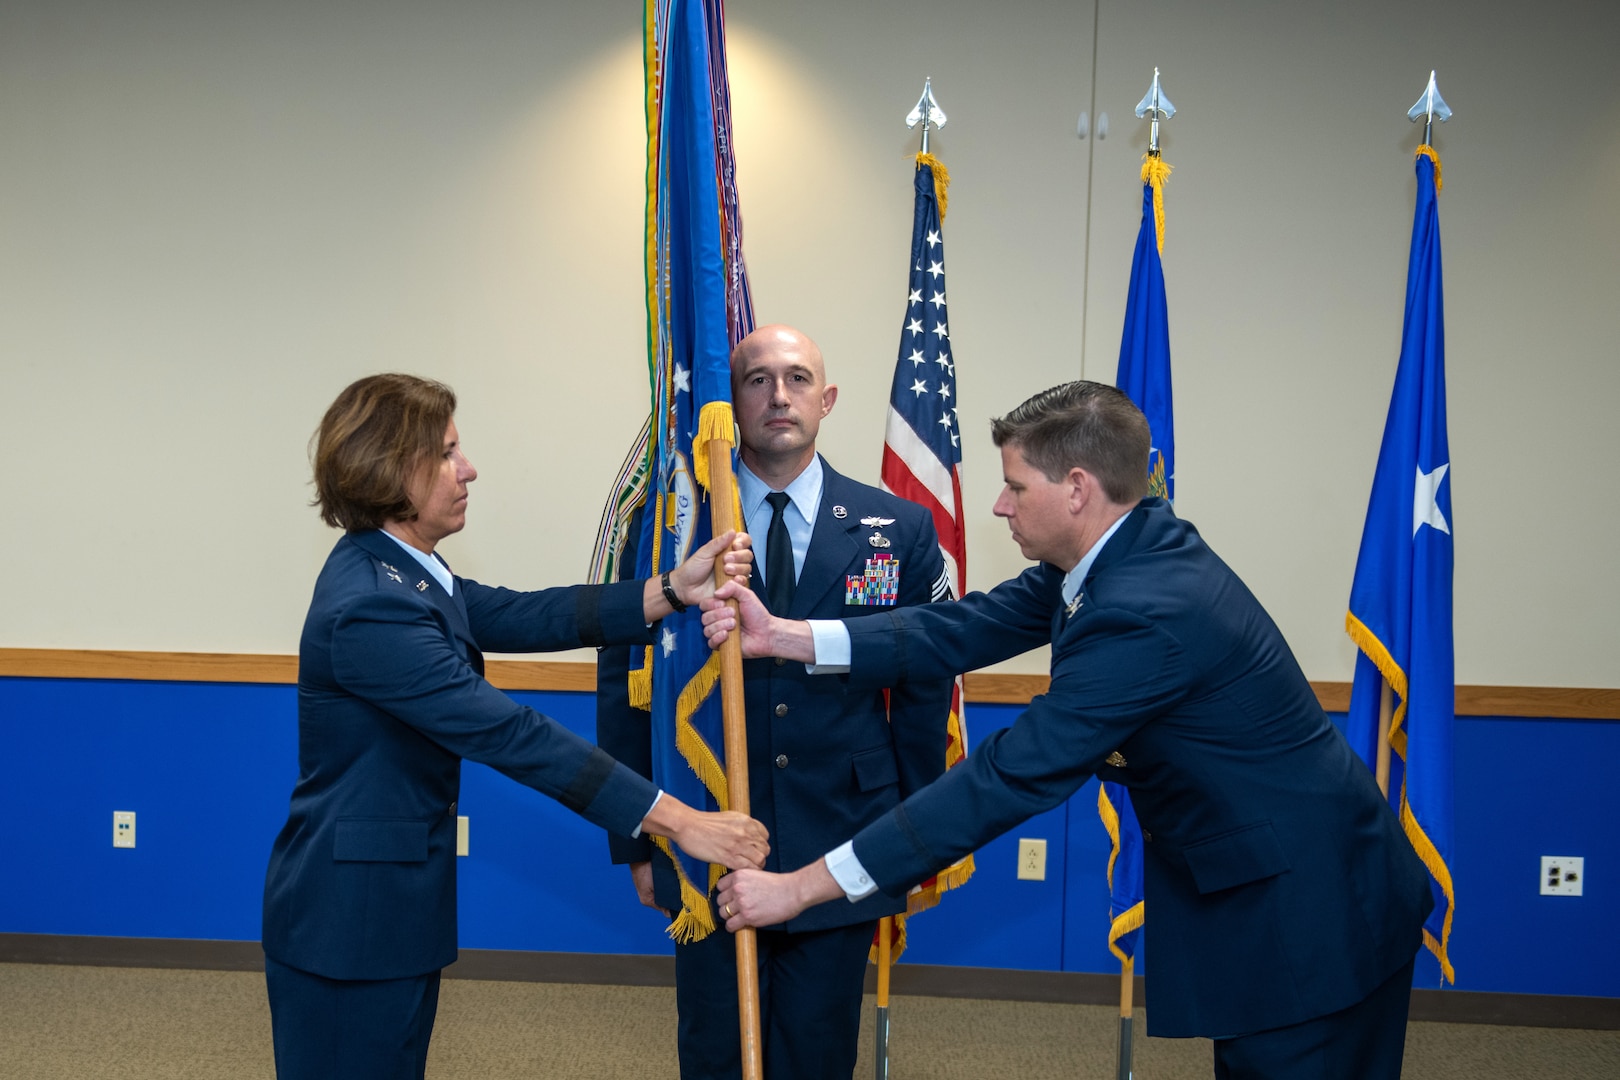 U.S. Air Force Maj. Gen. Andrea Tullos (left), Second Air Force commander, Keesler Air Force Base, Miss., passes the guidon to Col. Rockie Wilson (right), 37th Training Wing commander, during the change of command ceremony July 15, 2020